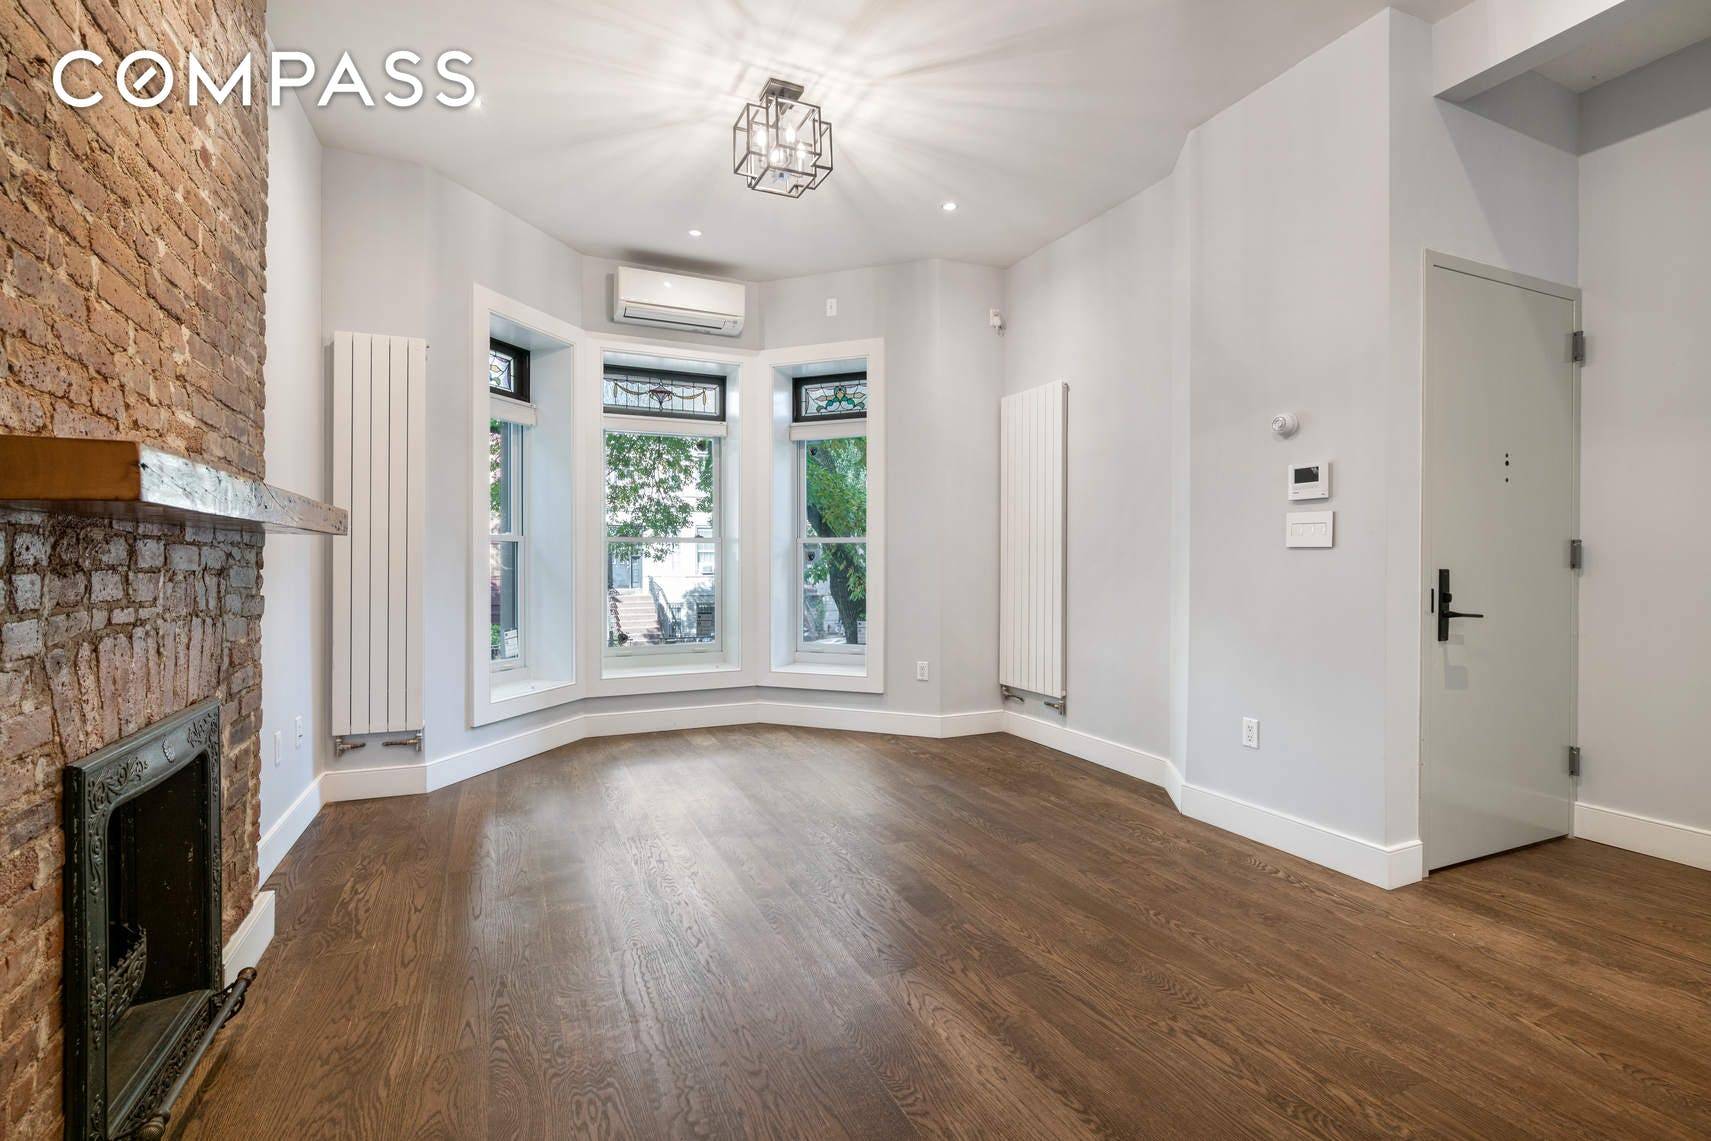 No detail spared in this beautiful fully renovated garden duplex.